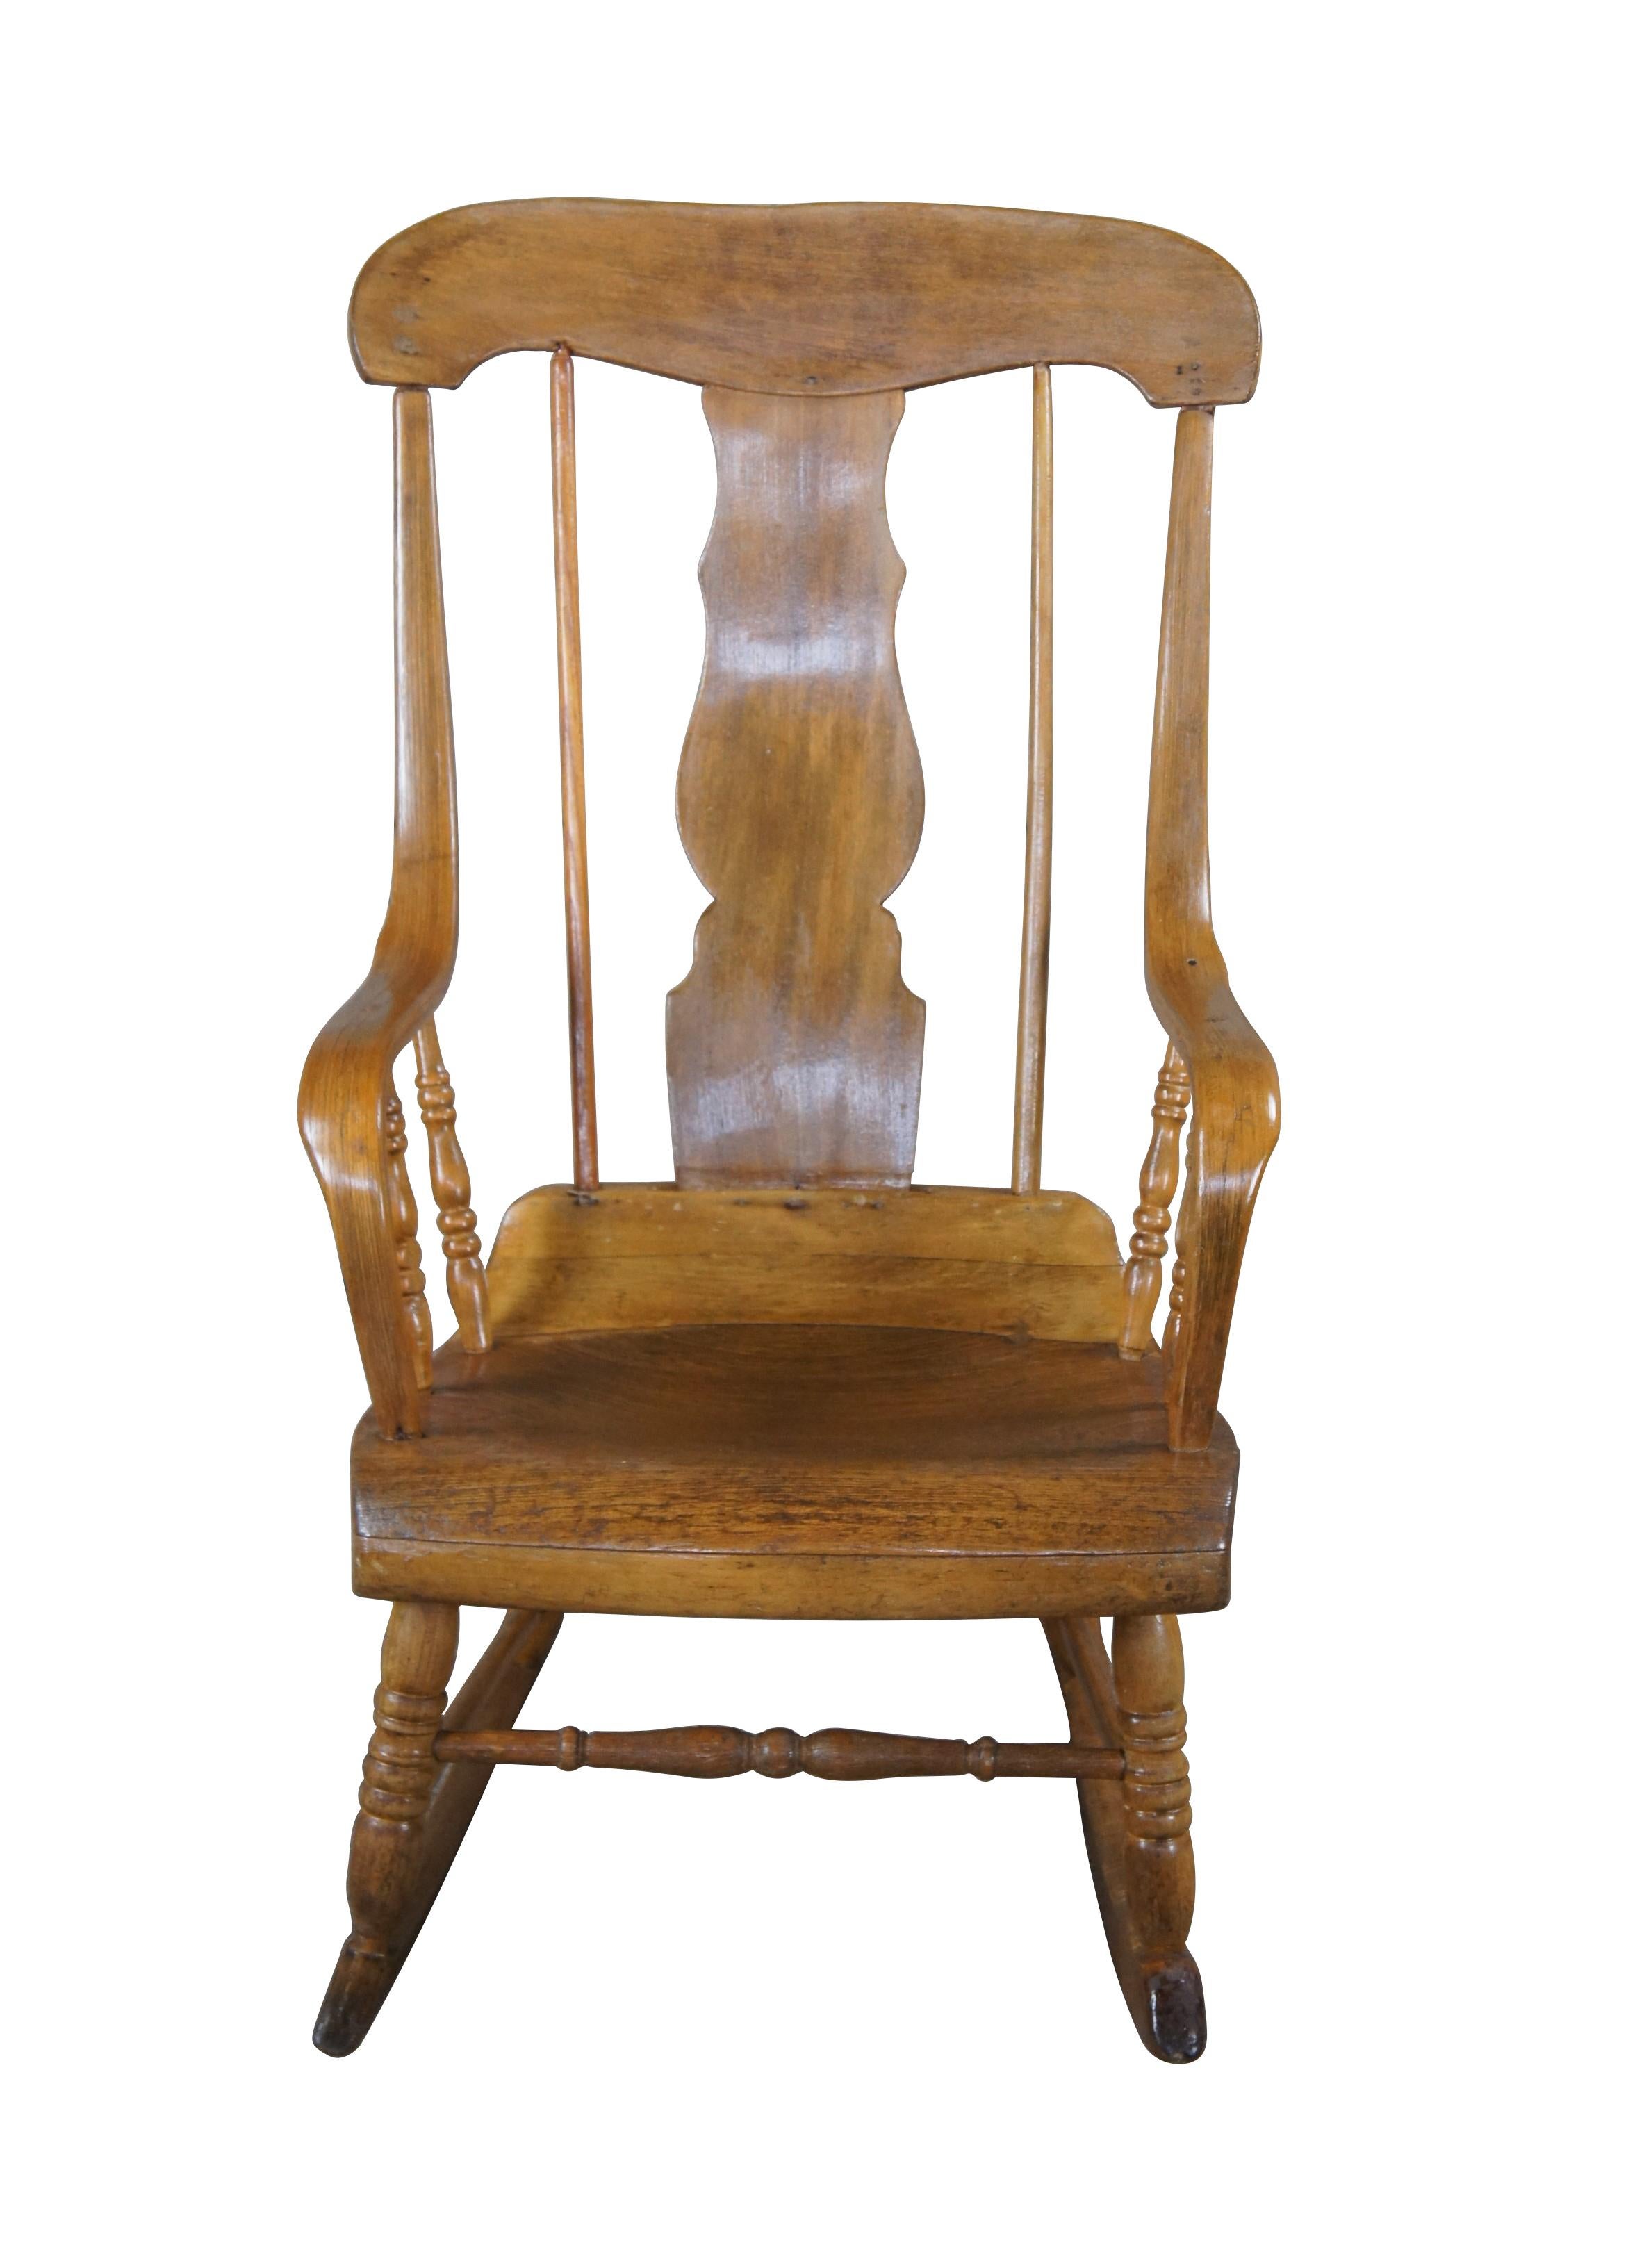 Antique Boston rocker, circa 1850s. Despite the name, Boston rockers were actually made in Connecticut. They have a scrolled seat, spindled splat back, and a rolling headpiece. The Boston rocker was most popular from 1830 to 1890.

Dimensions:
33